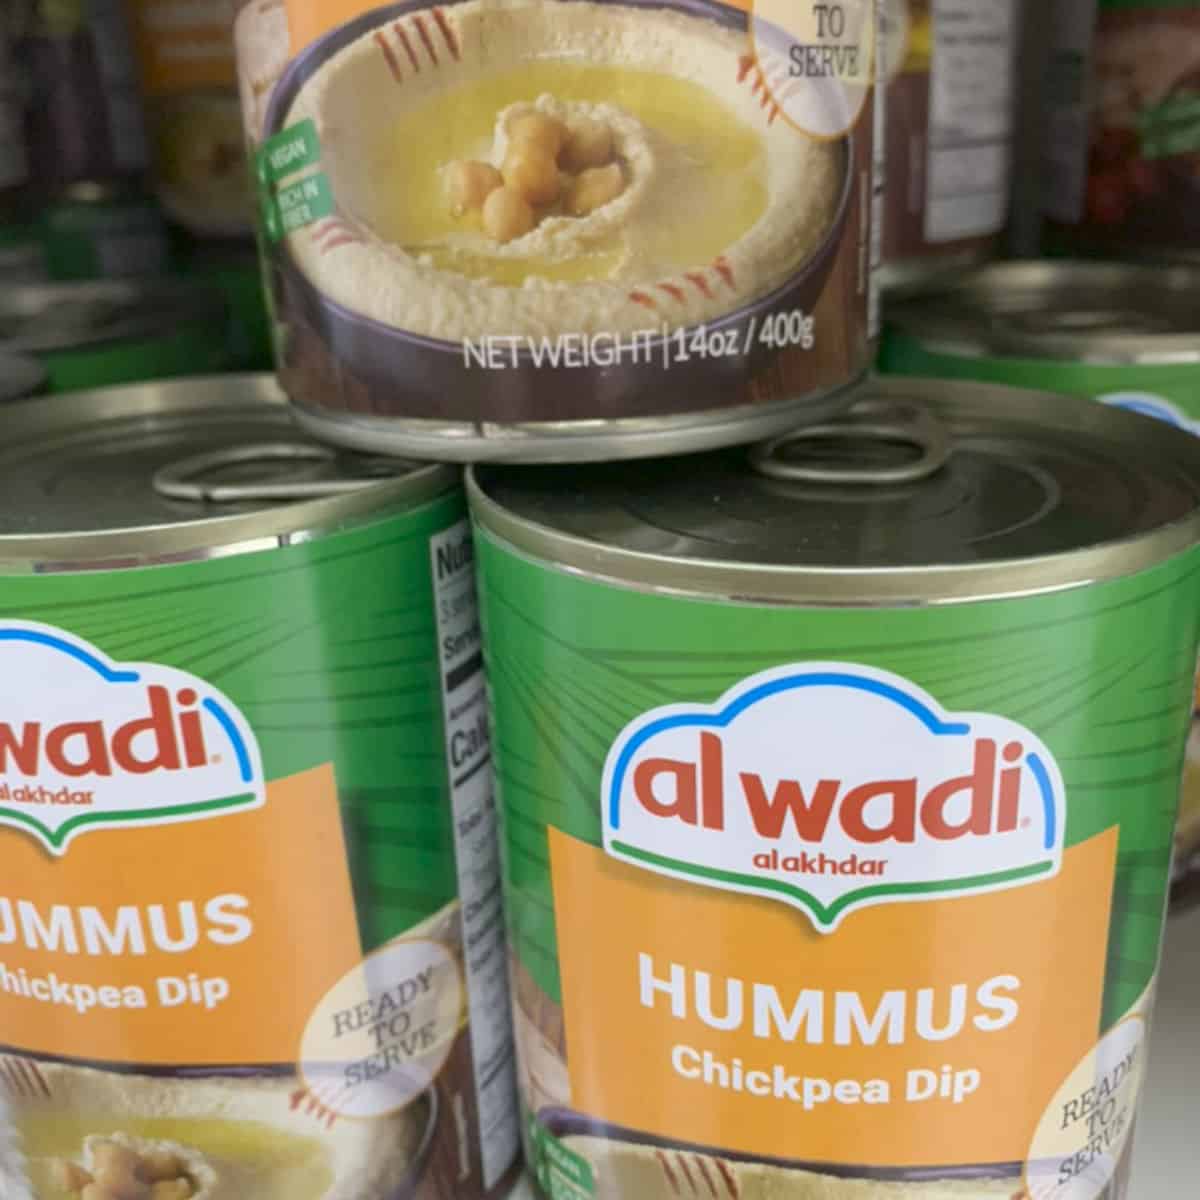 Picture of a canned chickpea dip.